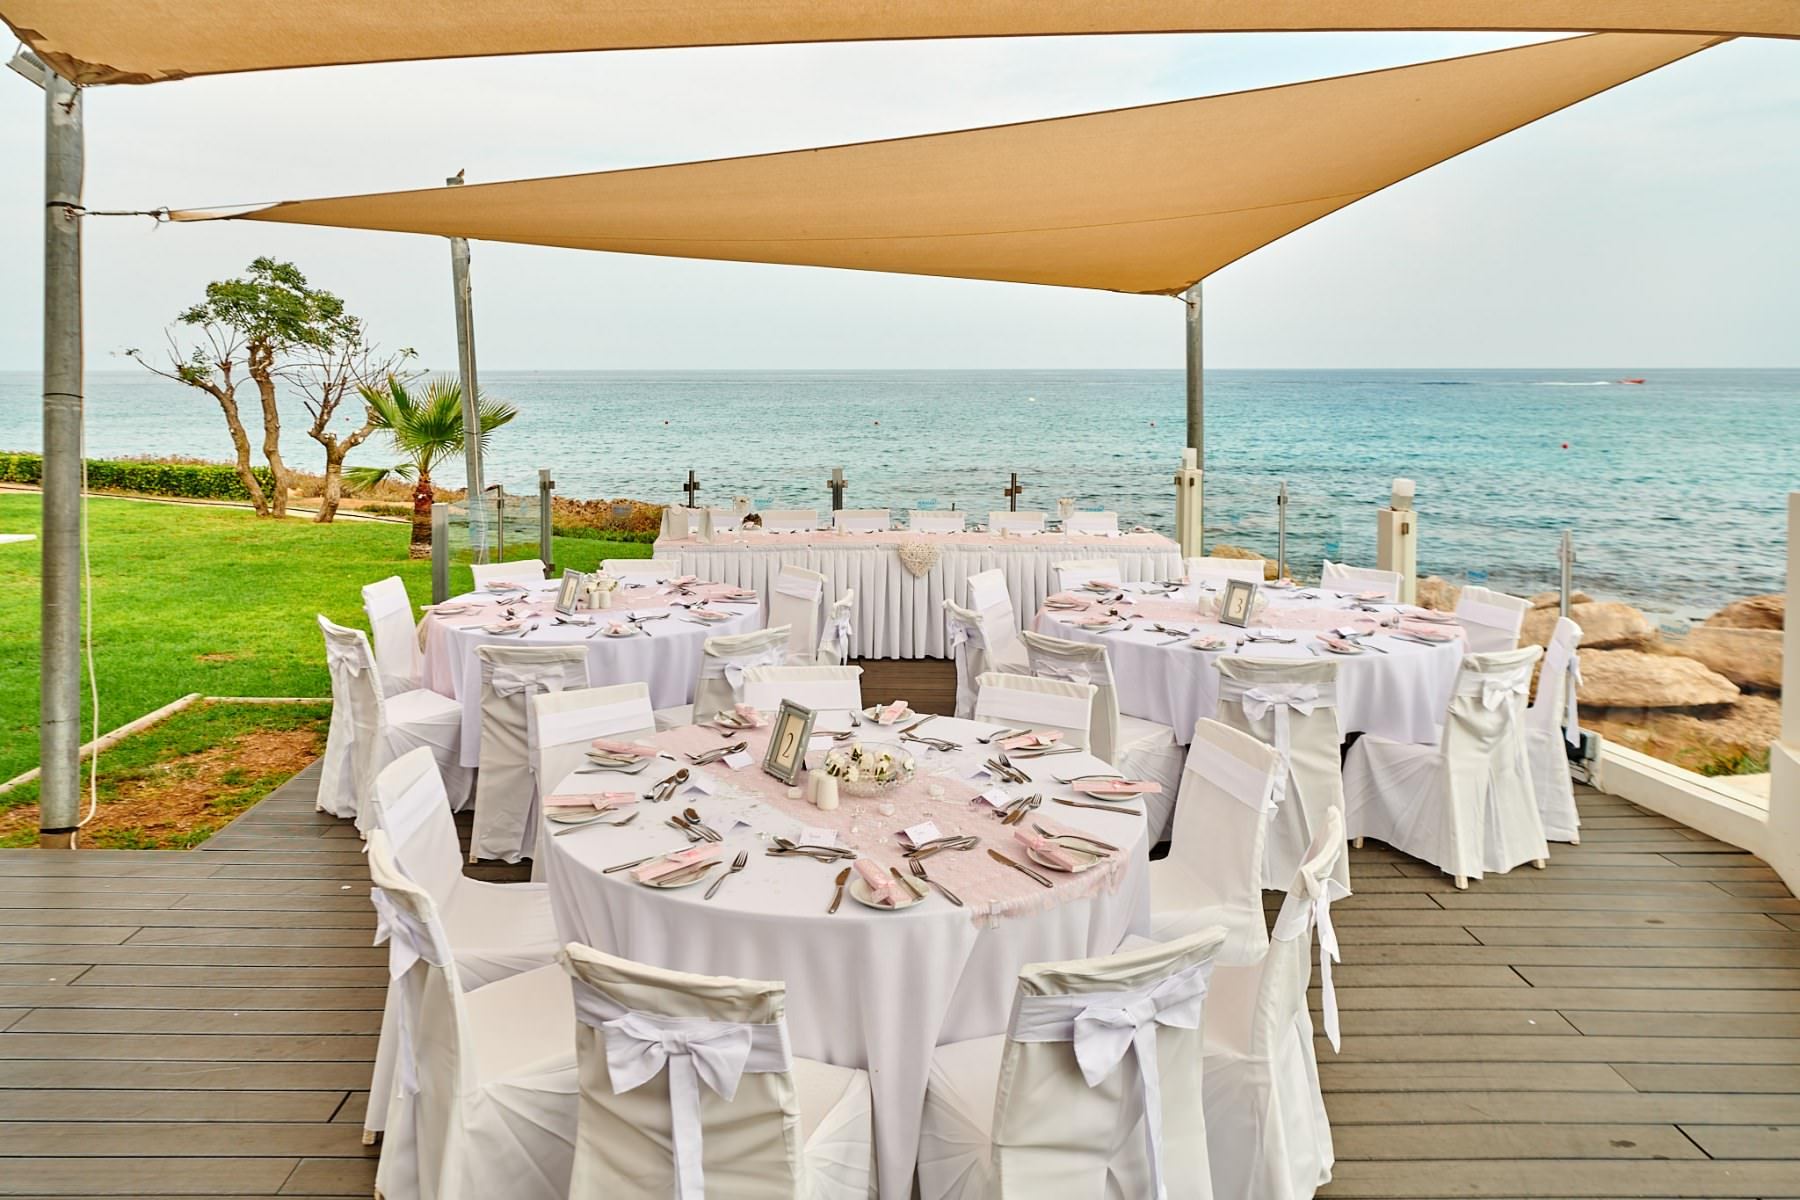 The wedding of Natalie and Steve at the Pernera Beach Hotel in Protaras